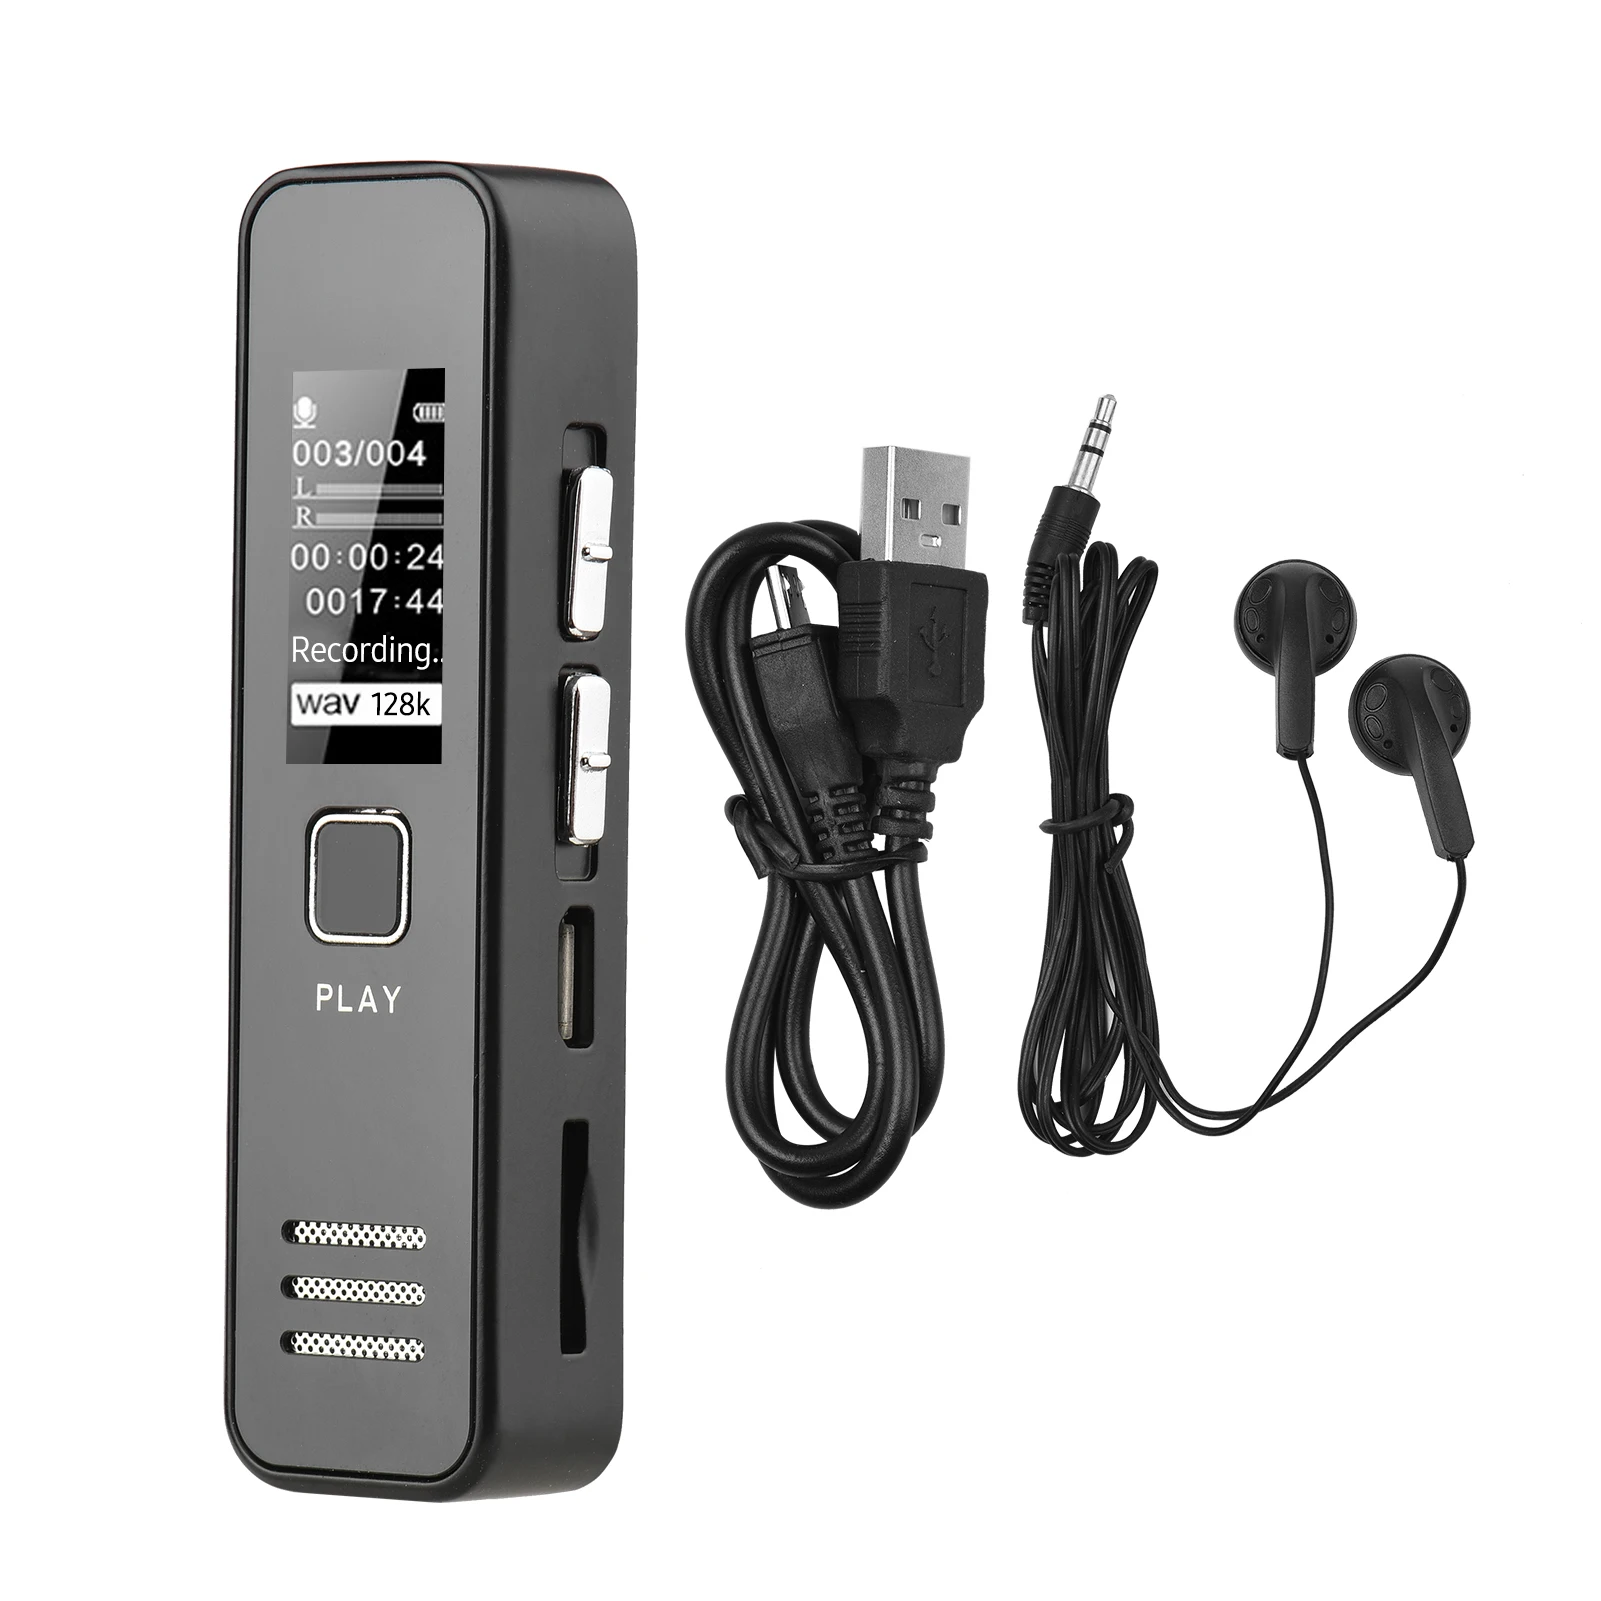 

Digital Voice Recorder 128GB Voice Recording Device 32-1536KBPS for Lecture Meeting Interview Business Talk Audio